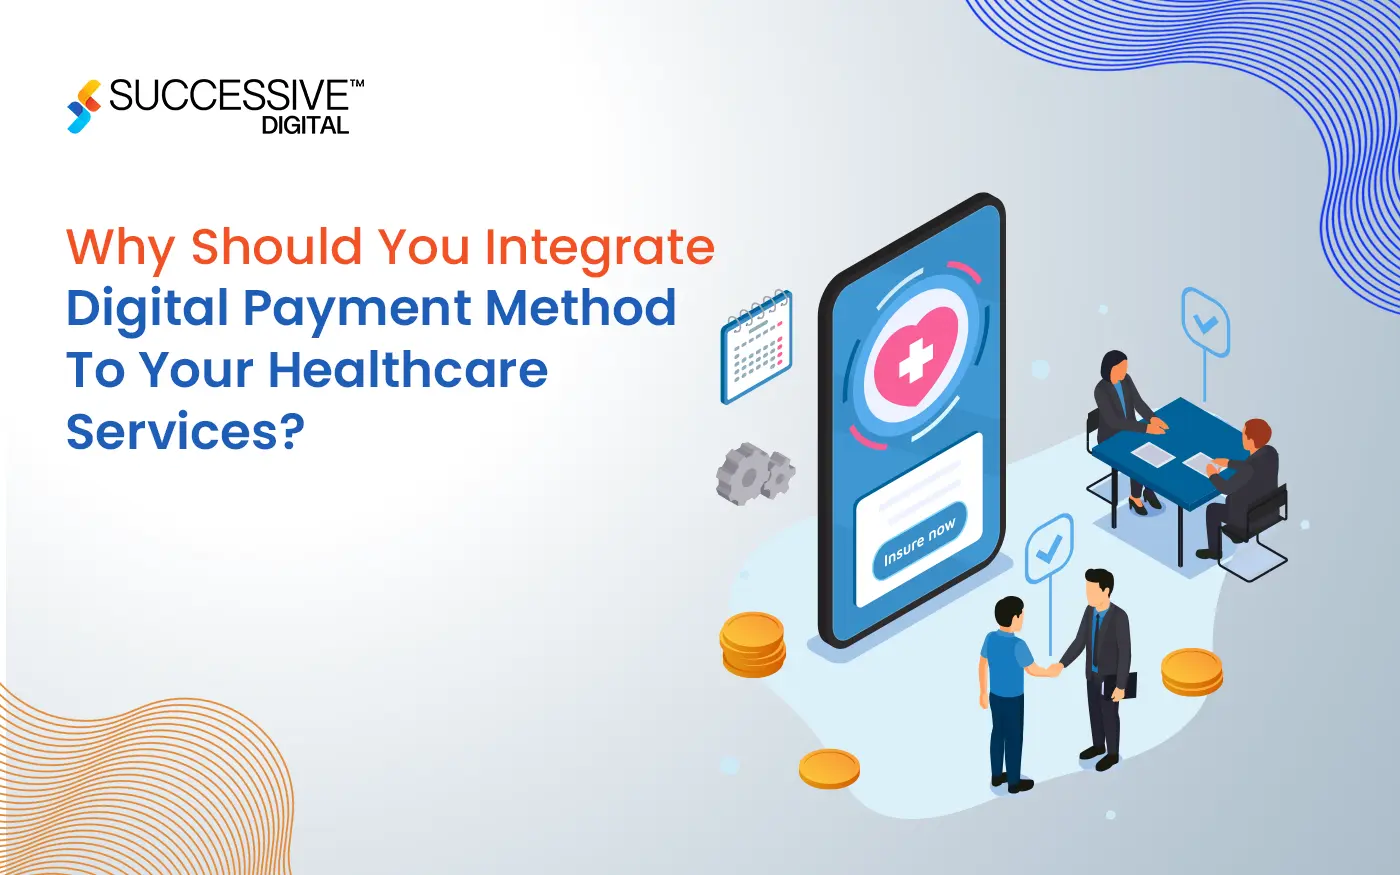 Why Should You Integrate Digital Payment Method To Your Healthcare Services?